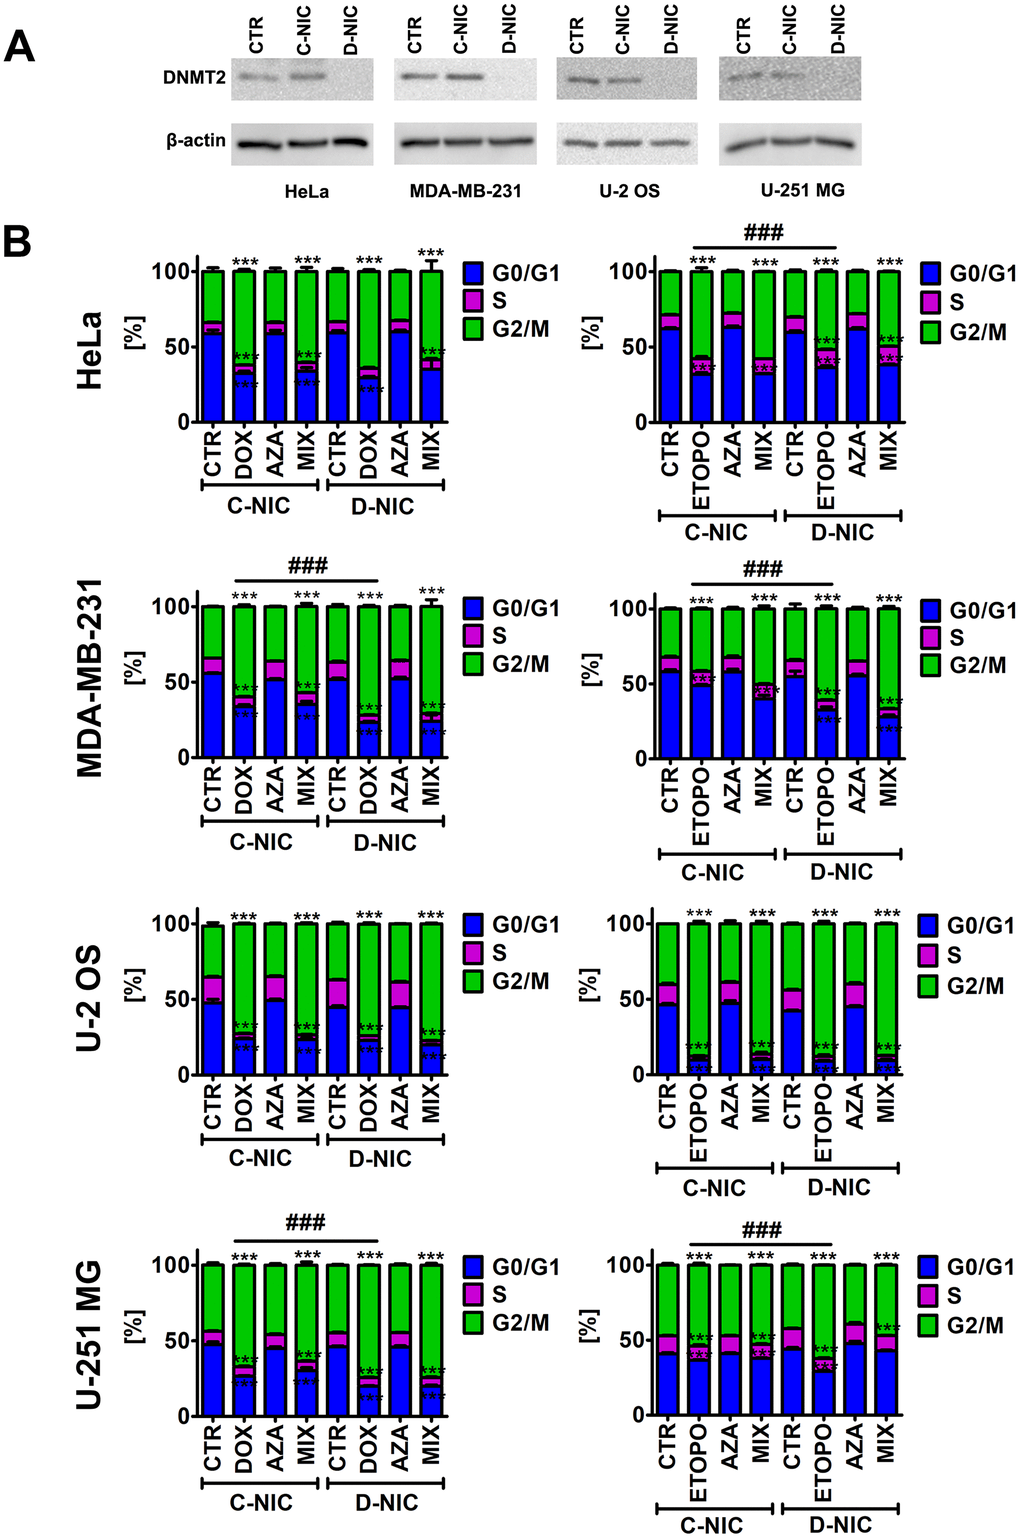 DNMT2/TRDMT1 gene knockout in four cancer cell lines, namely HeLa cervical cancer cells, MDA-MB-231 breast cancer cells, U-2 OS osteosarcoma cells and U-251 MG glioblastoma cells (A) and DNMT2/TRDMT1 gene knockout-mediated changes in the cell cycle of DOX- and ETOPO-treated cancer cells (B). (A) Western blot-based analysis of the protein levels of DNMT2/TRDMT1. Anti-β-actin antibody served as a loading control. (B) DNA content-based analysis of cell cycle was conducted using flow cytometry. Bars indicate SD, n = 3, ***p a posteriori test), ###pa posteriori test). CTR, control conditions; DOX, doxorubicin treatment; ETOPO, etoposide treatment; AZA, azacytidine treatment; MIX, azacytidine post-treatment; C-NIC, control cells with unmodified levels of DNMT2/TRDMT1 containing control plasmid; D-NIC, cells with DNMT2/TRDMT1 gene knockout containing dedicated DNMT2 double nickase plasmid.